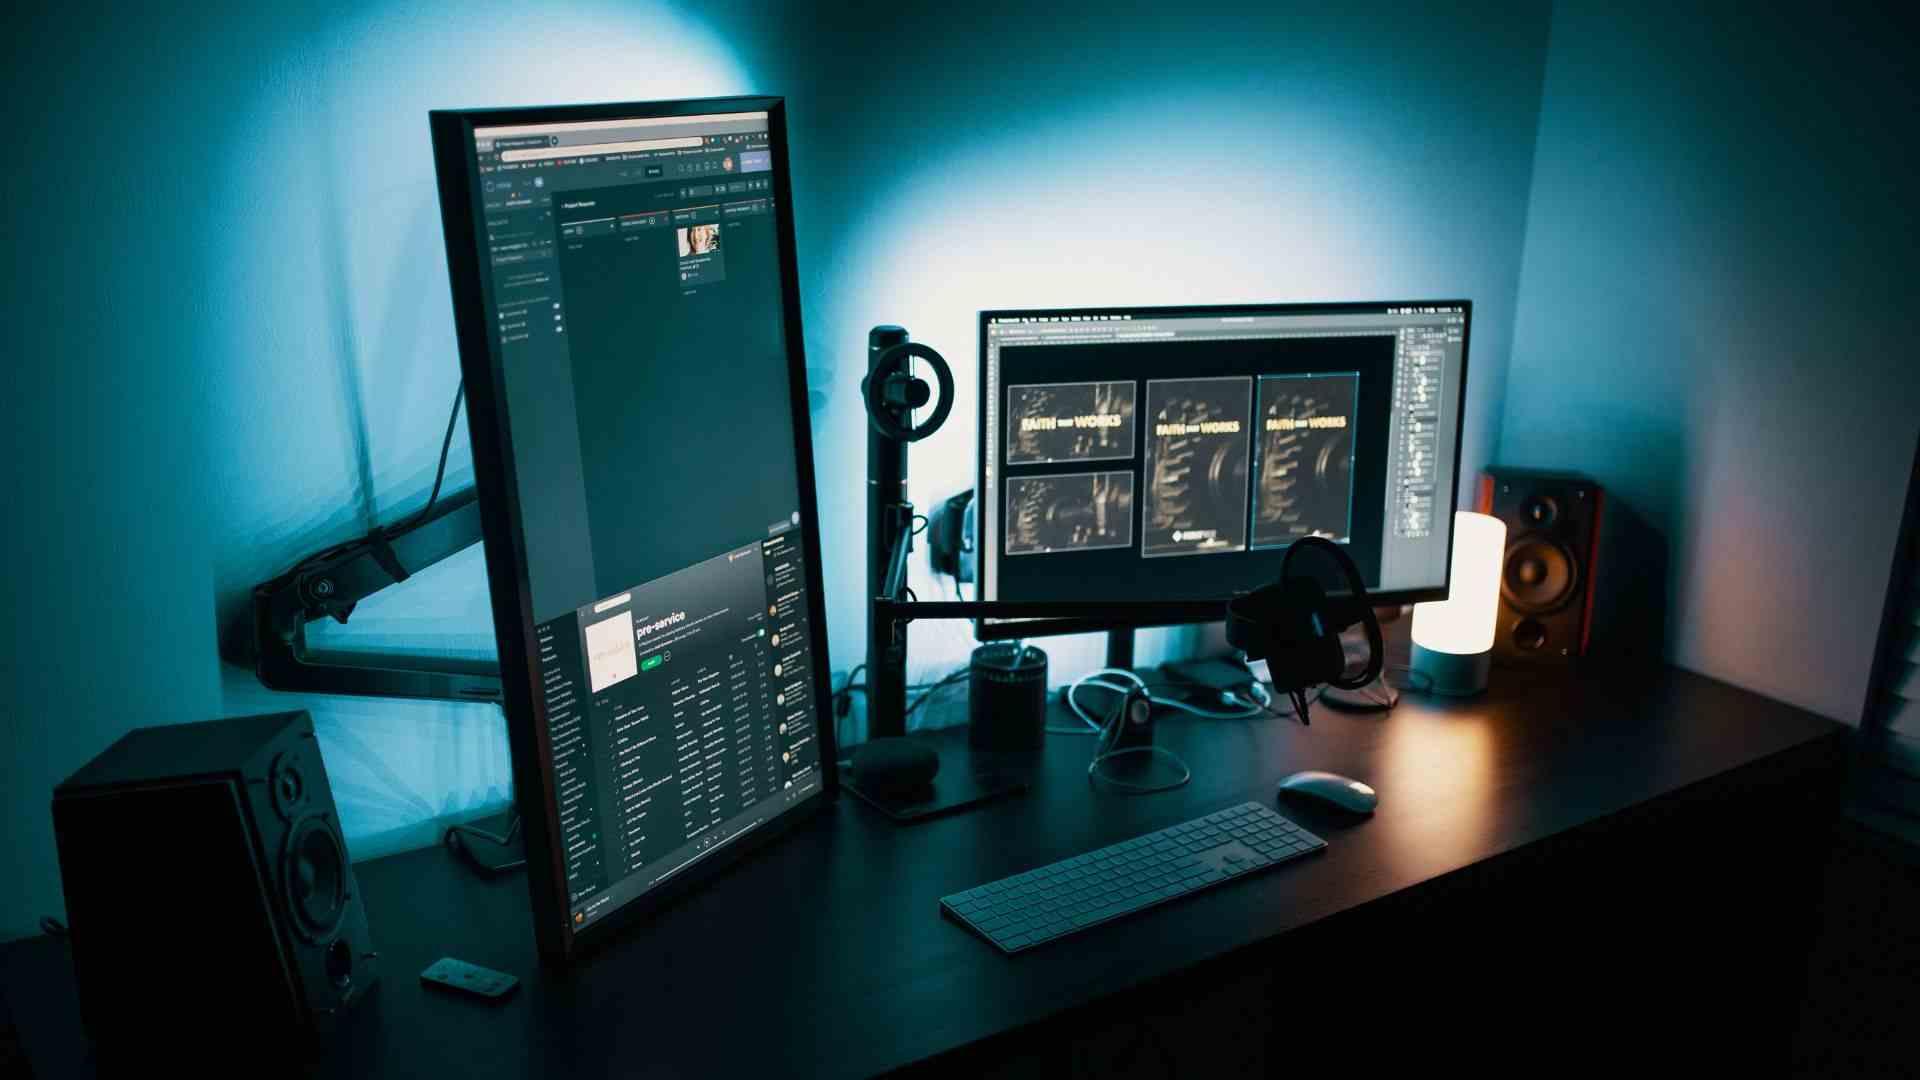 7 Easy Methods of Fitting Two Monitors In Small Place